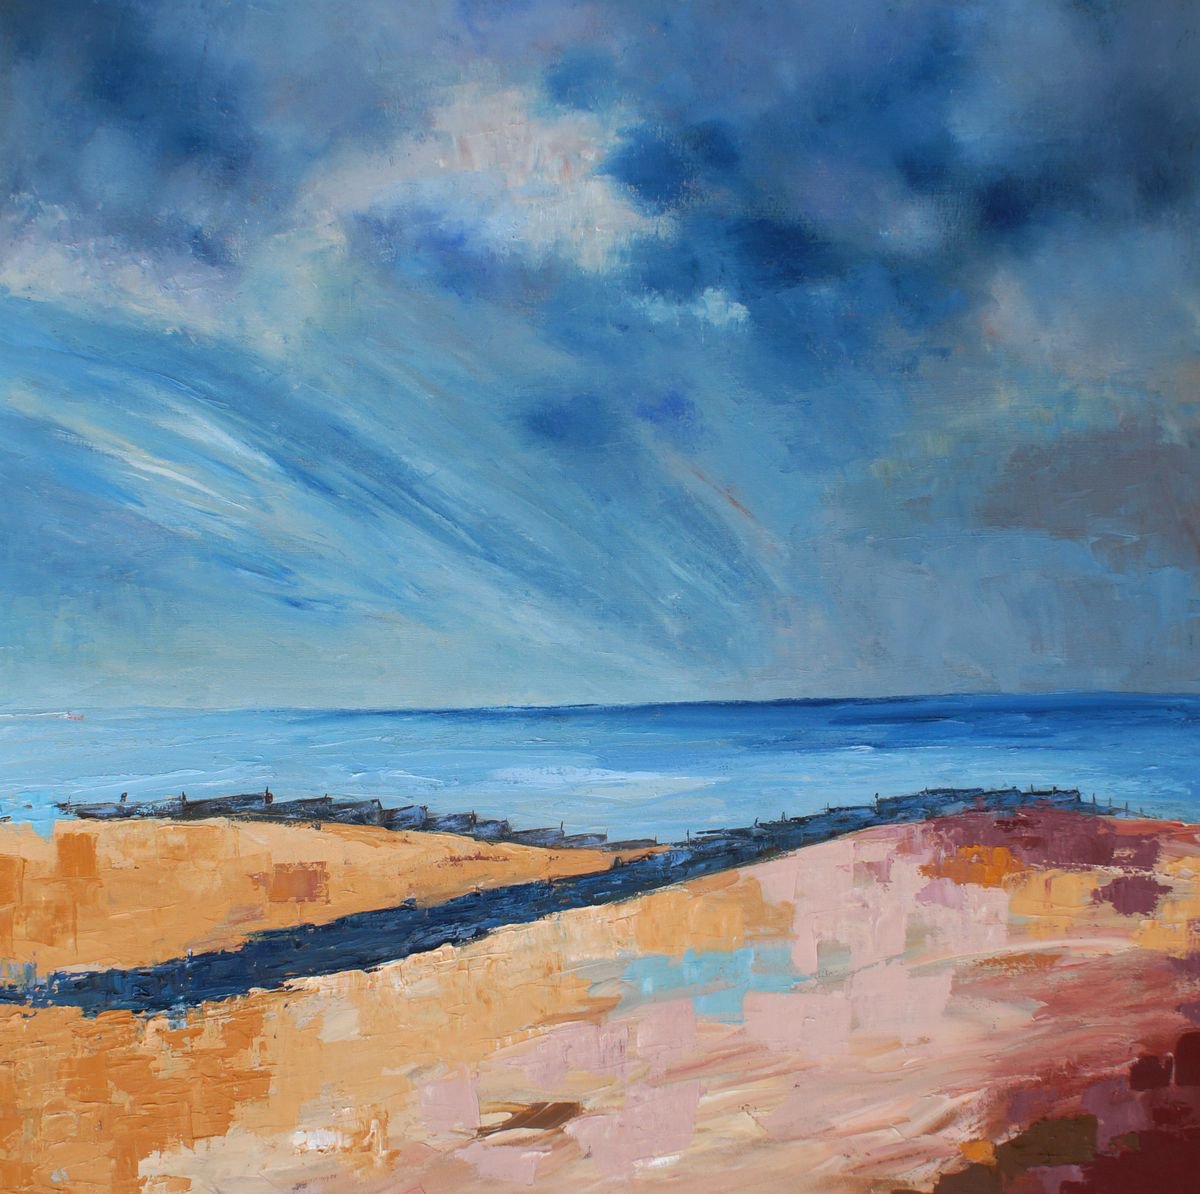 Whitstable Groynes - oil on canvas 30x30 by Ann Palmer